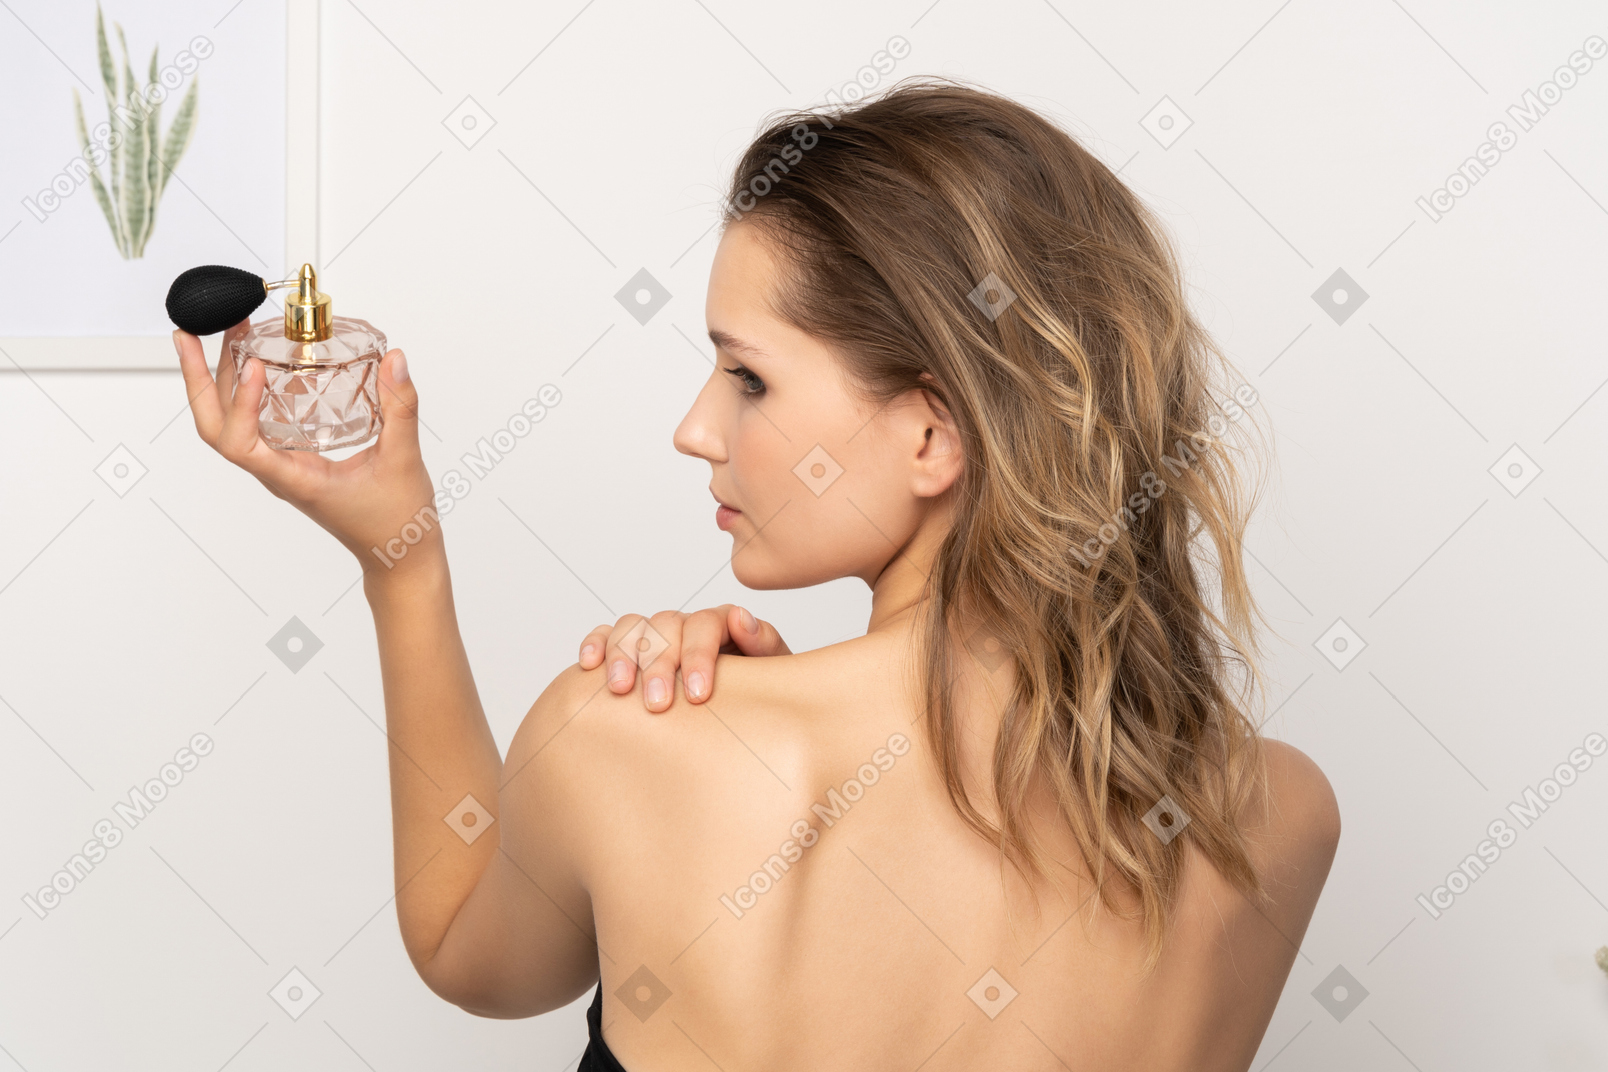 Back view of a sensual young woman holding a bottle of perfume